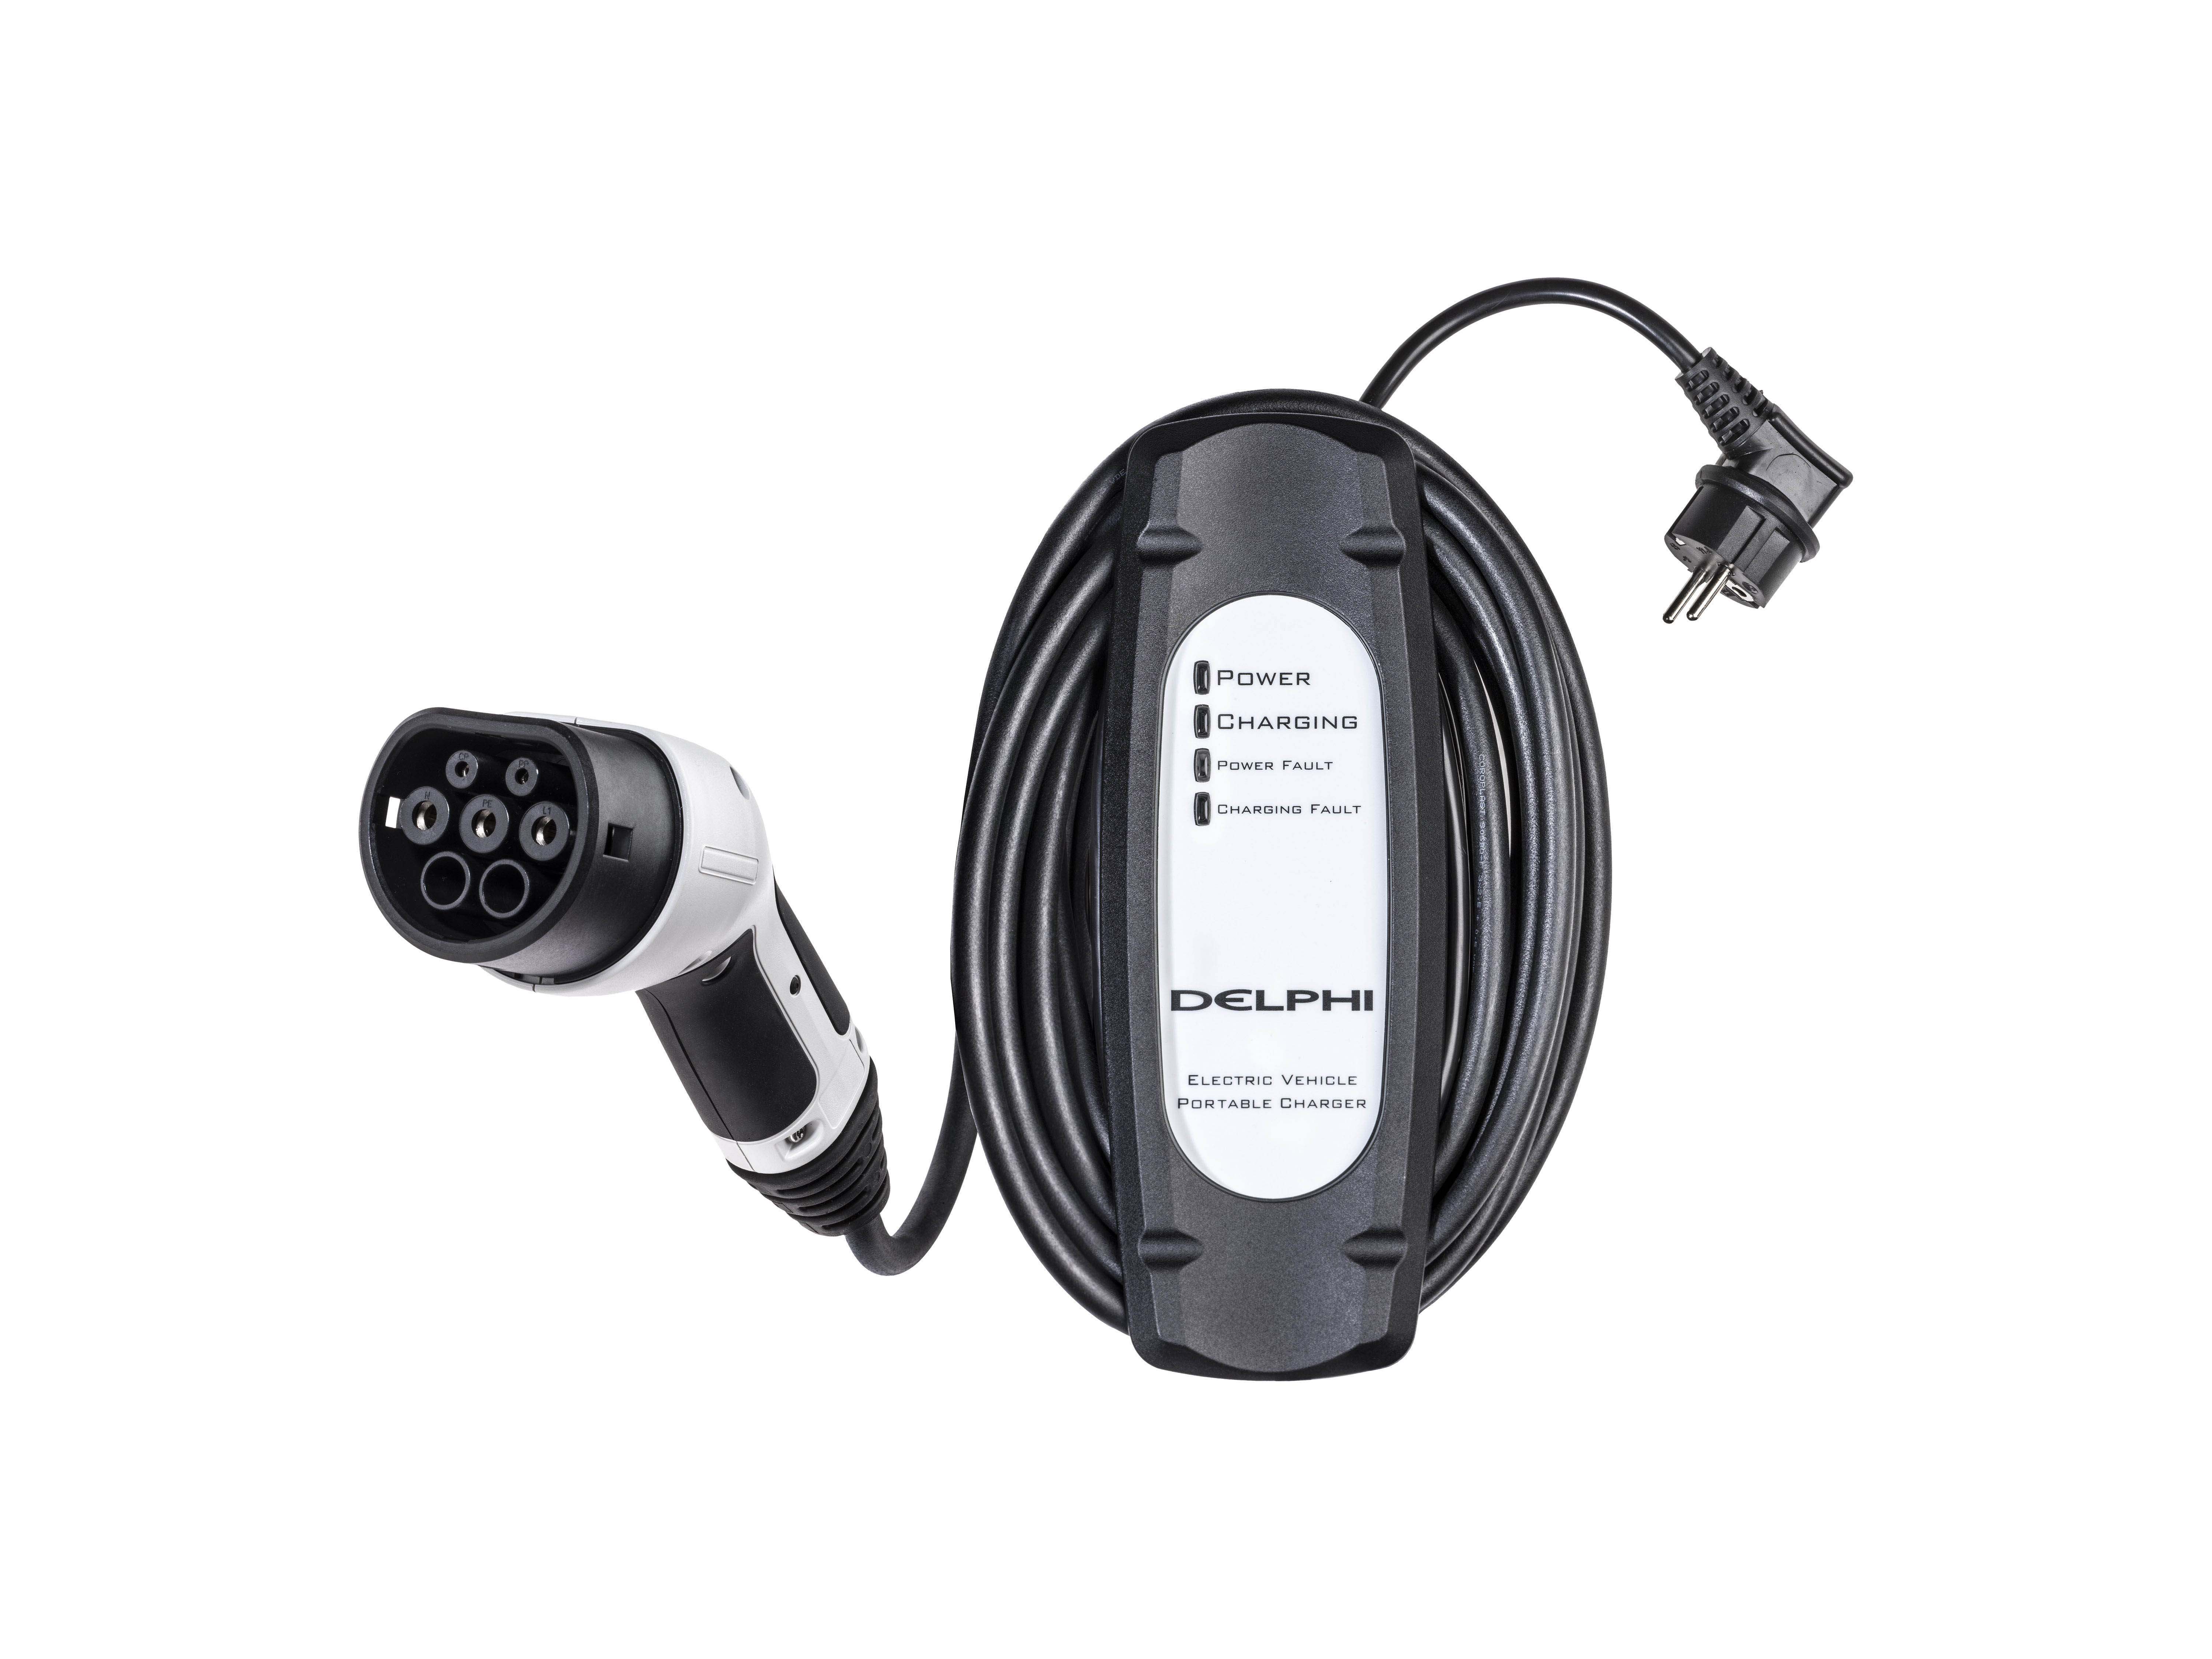 Proven portable mode 2 cordset for electric vehicle charging from